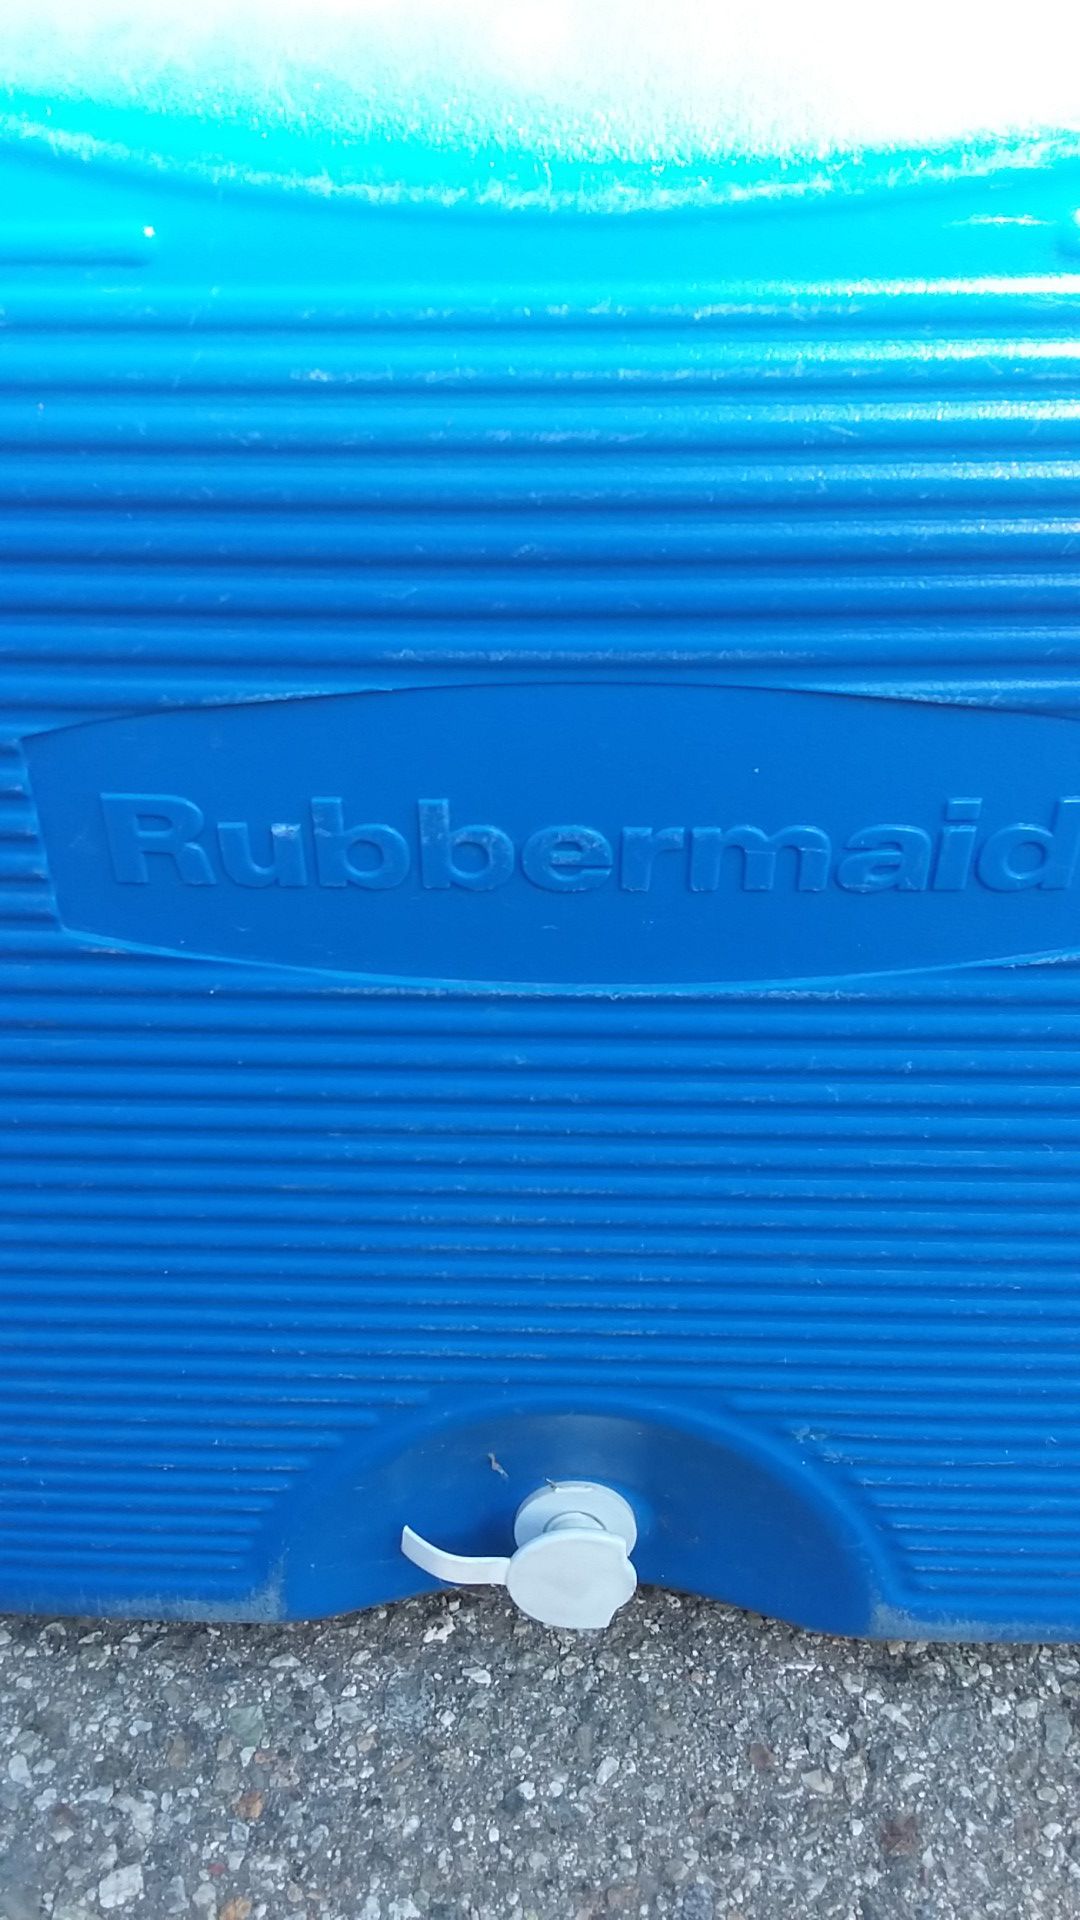 🏖 Rubbermaid Ice Chest🏝